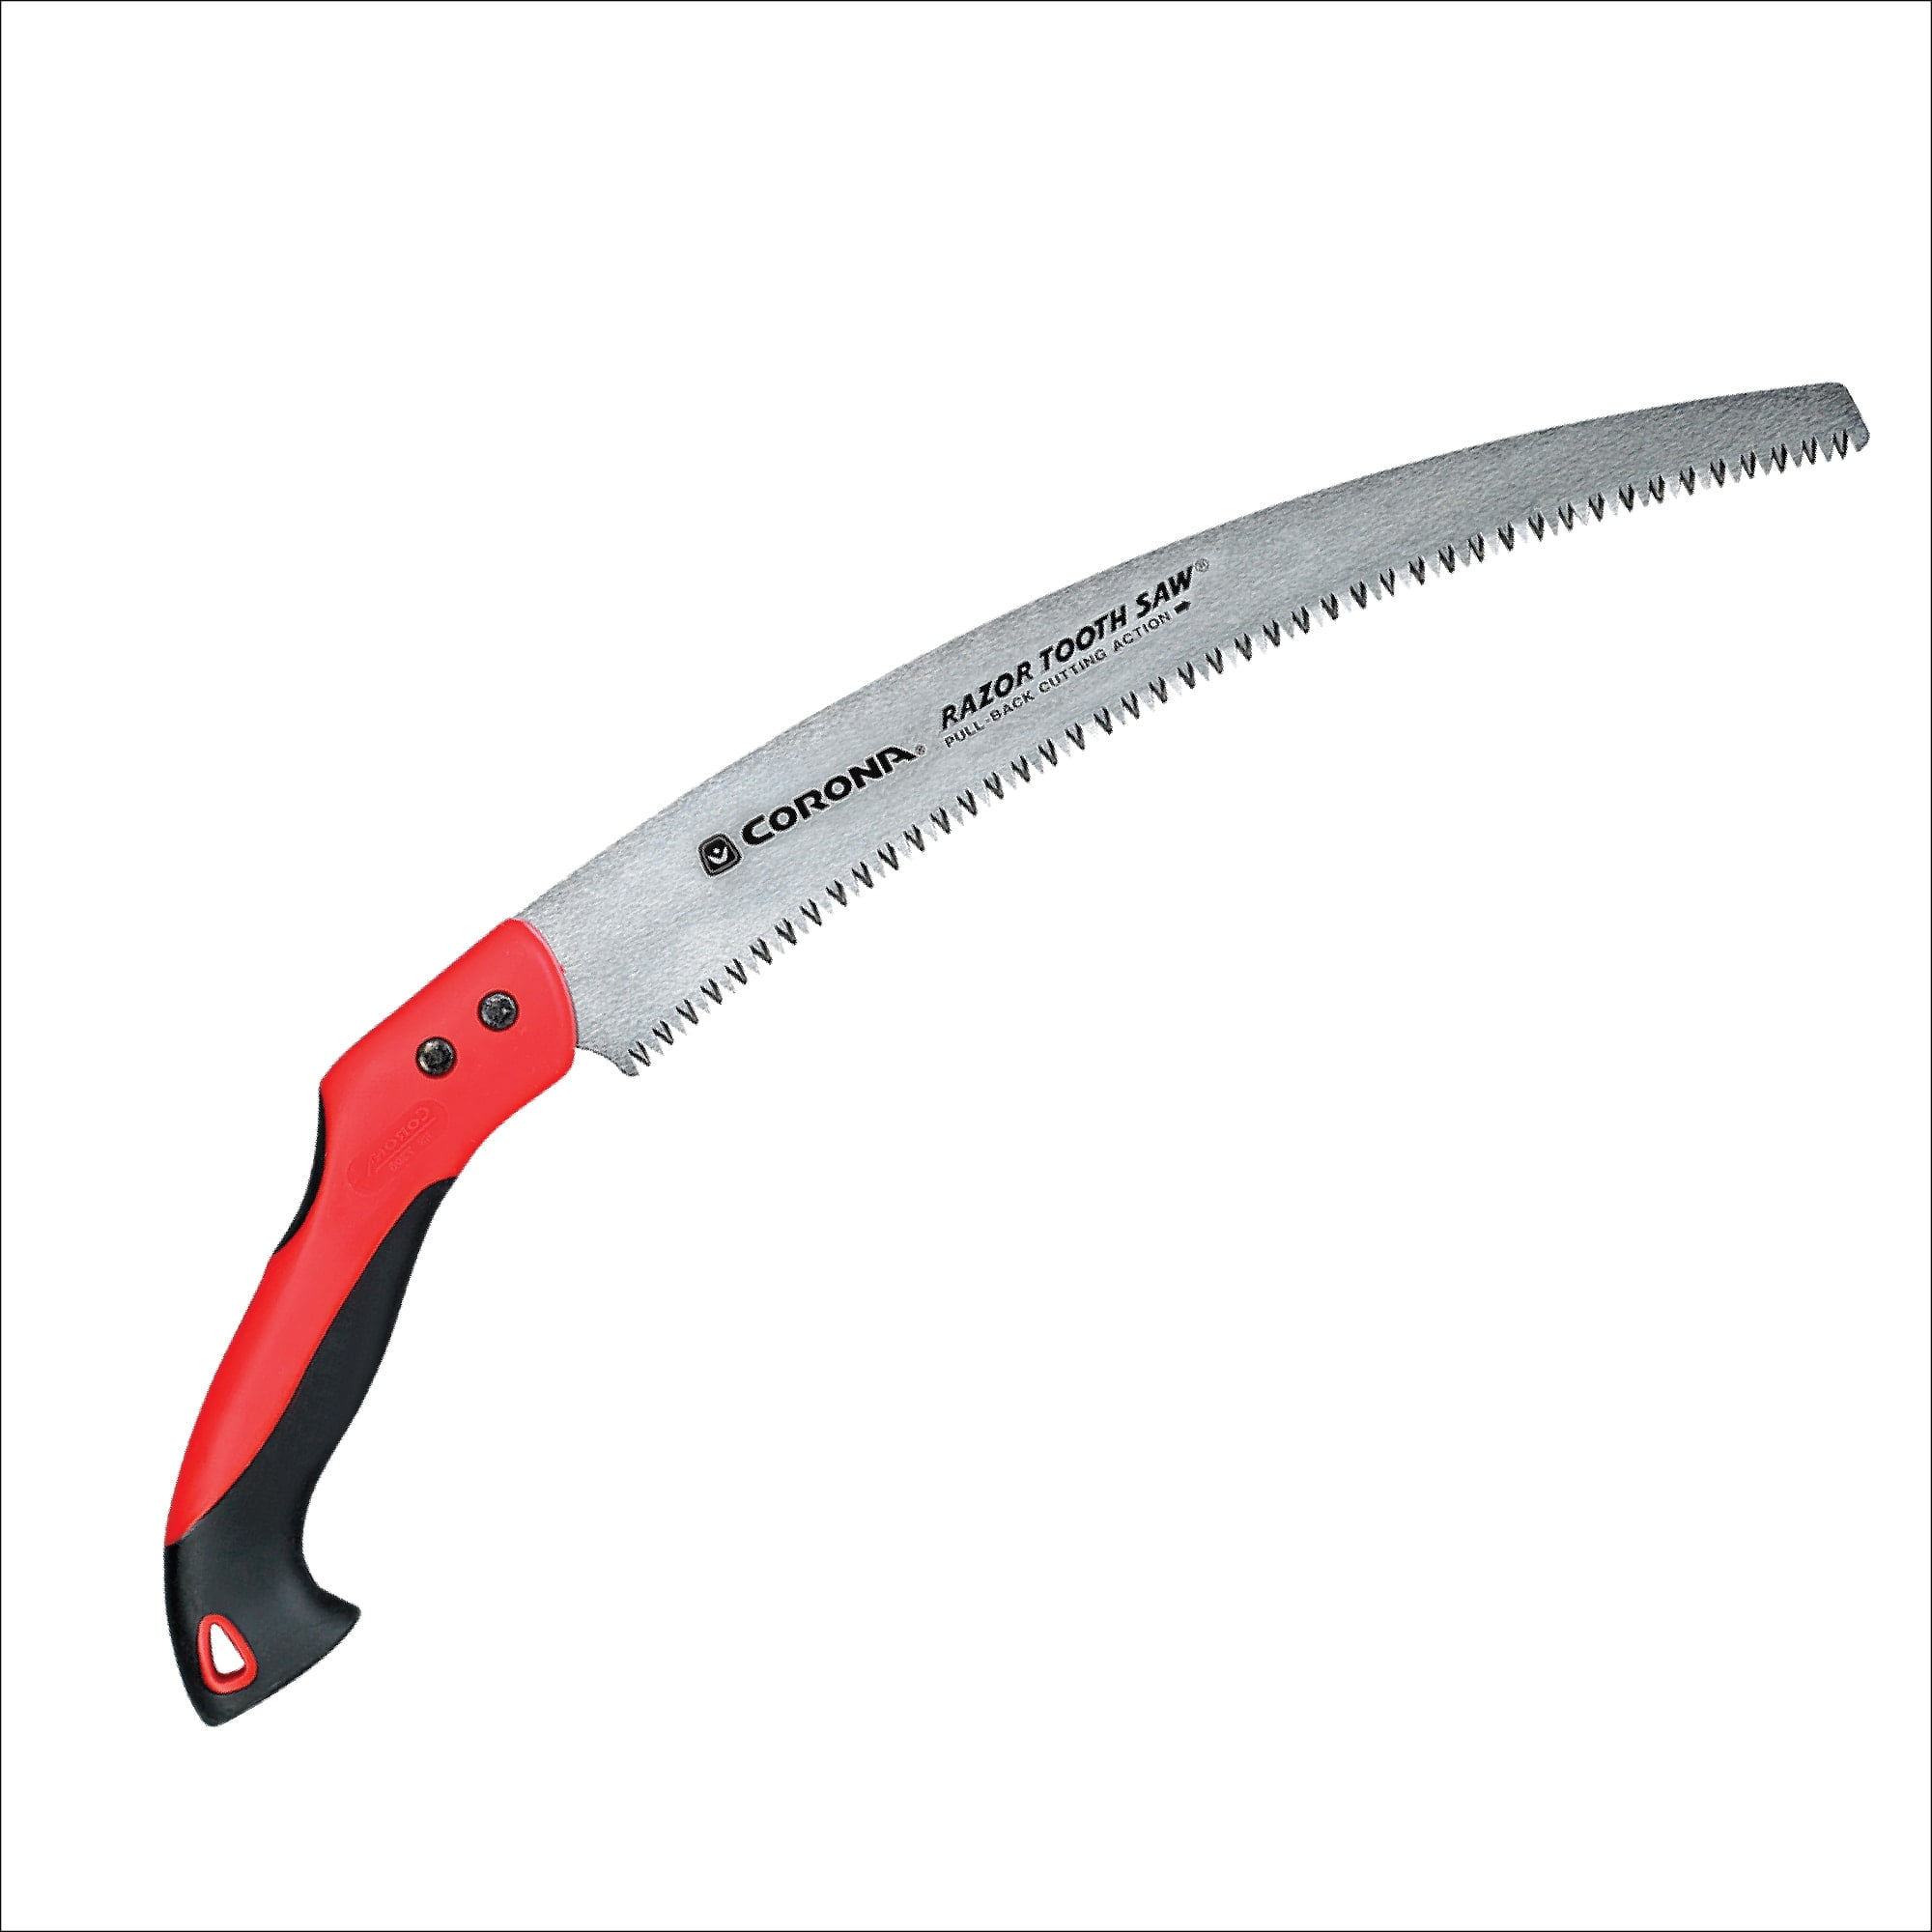 TREE PRUNING WET DRY WOOD PRUNING SAW FIXED HANDLE PUSH AND PULL STROKE CUT 